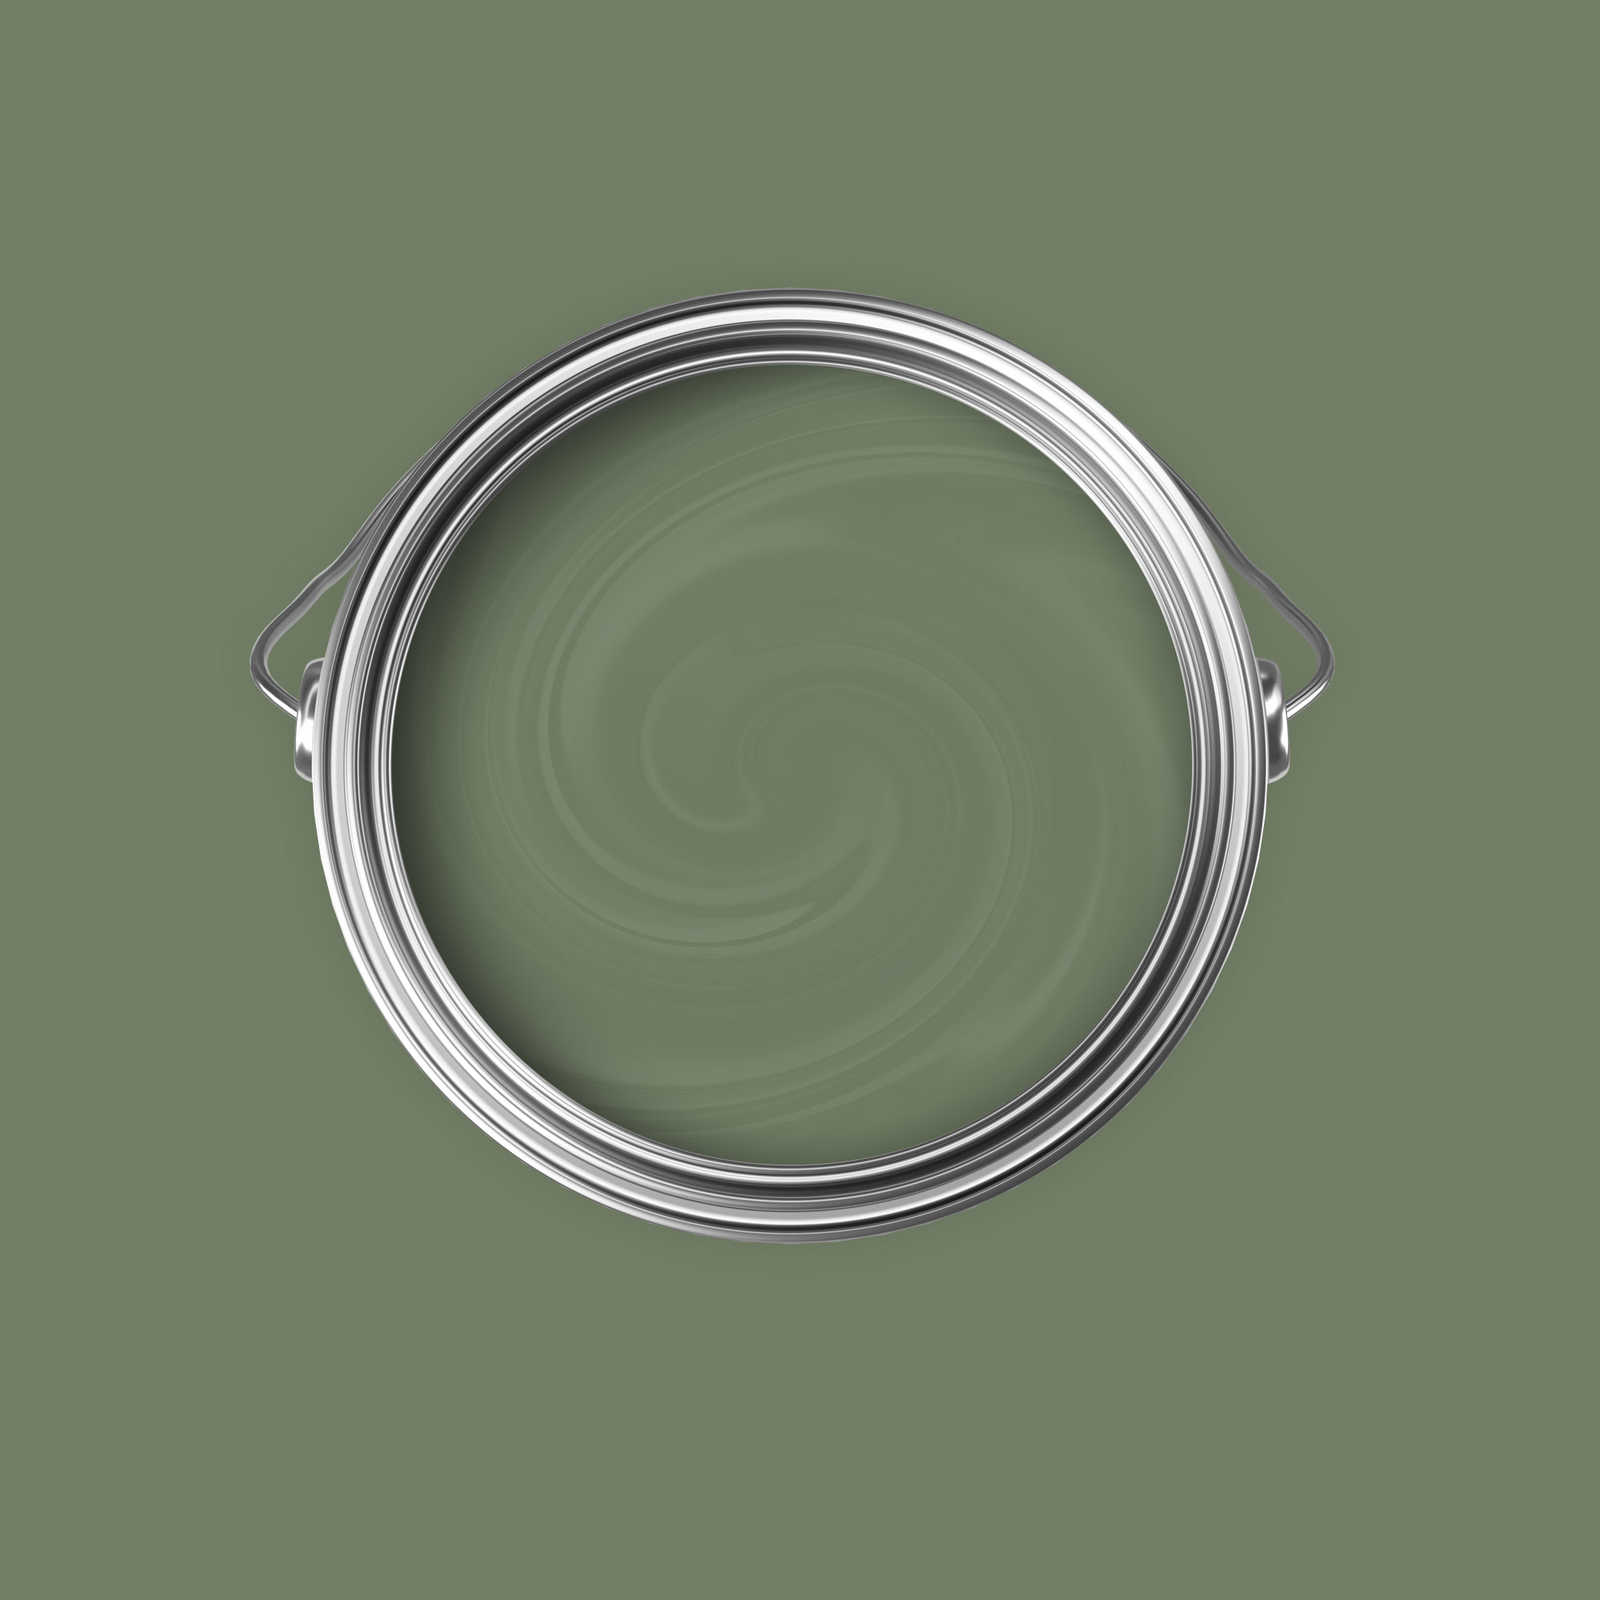             Premium Wall Paint Relaxing Olive Green »Gorgeous Green« NW504 – 5 litre
        